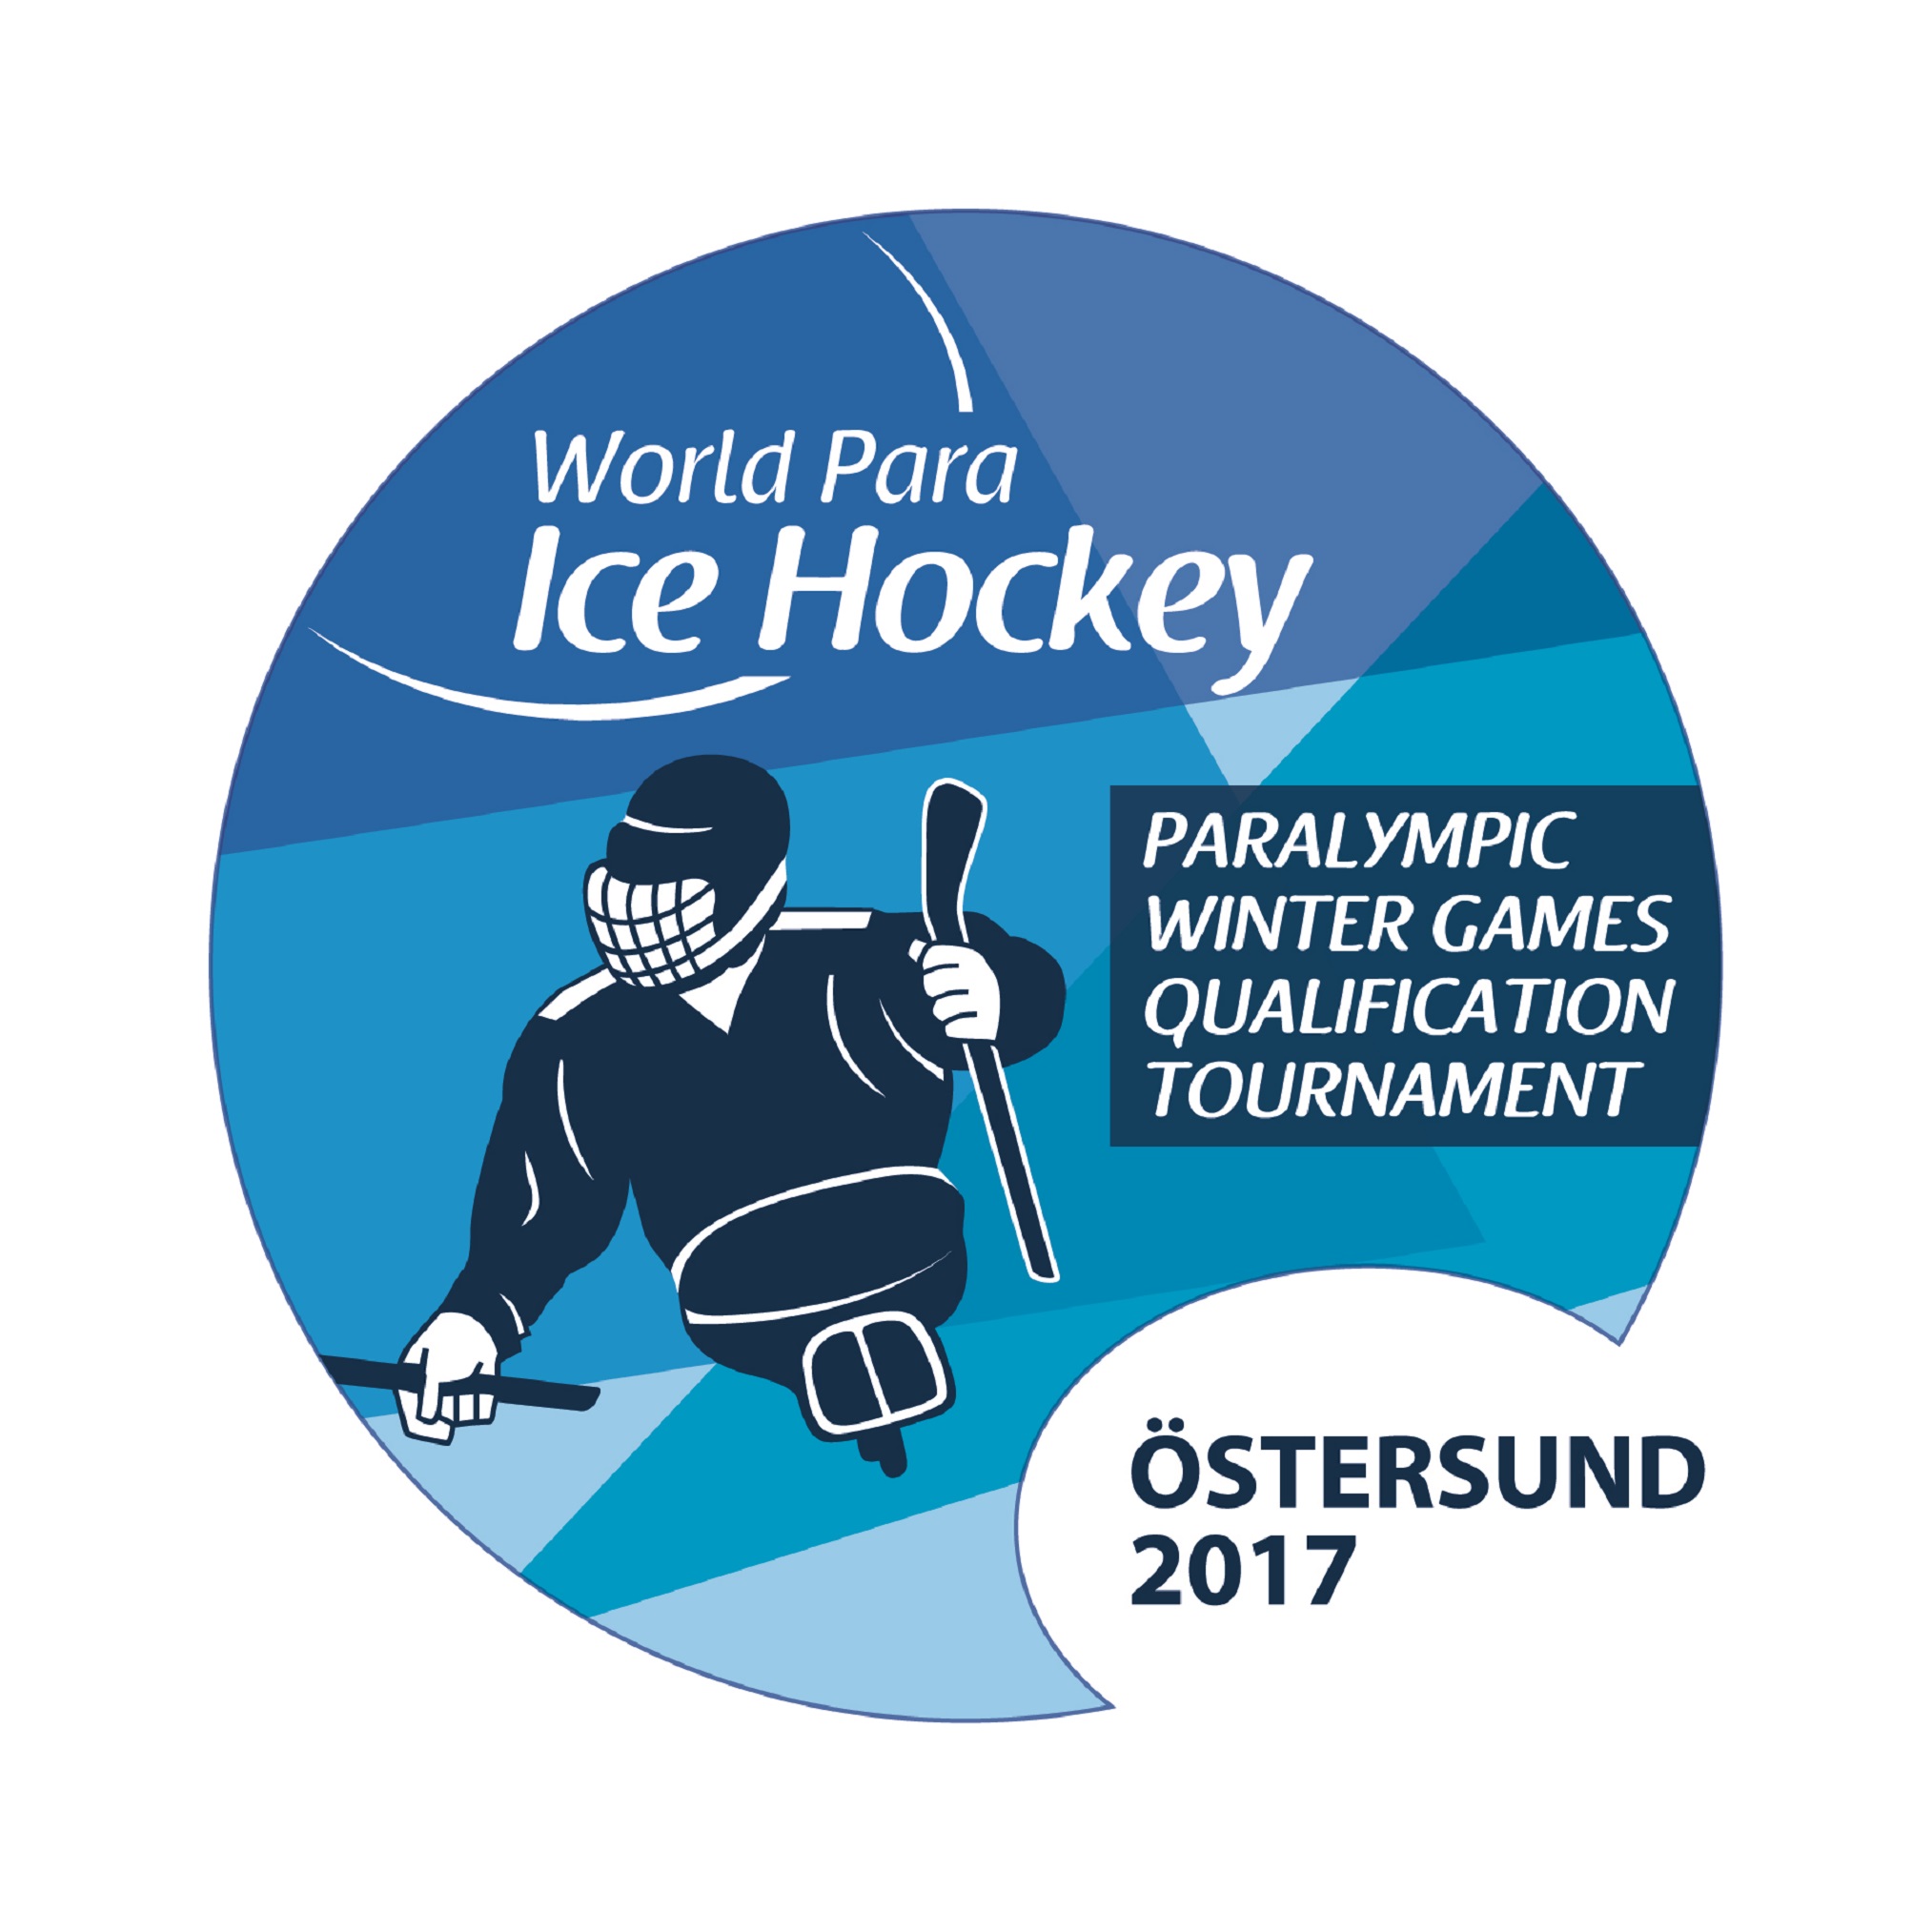 The official logo for Ostersund 2017